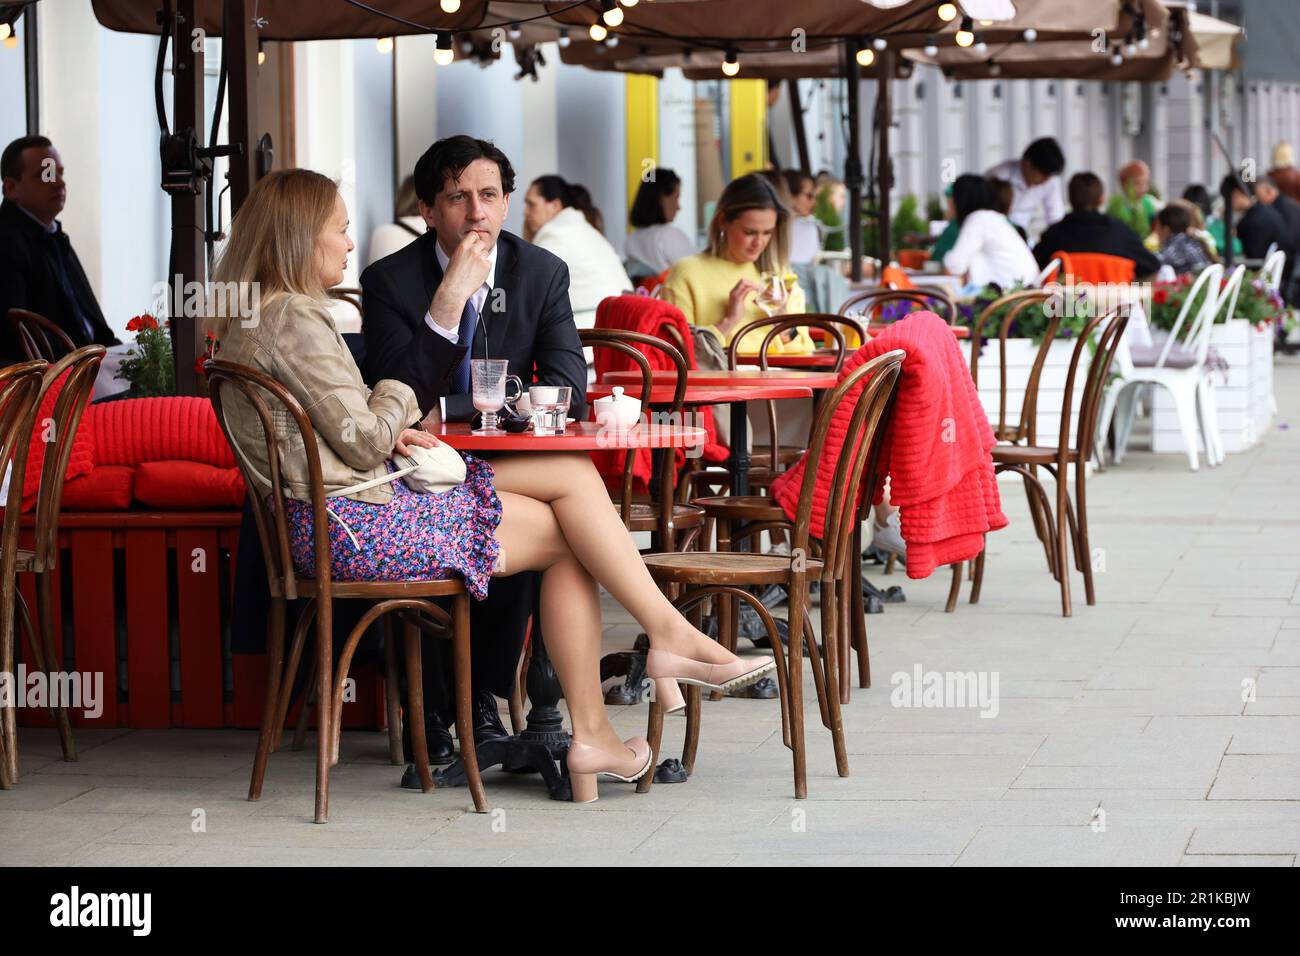 People eating in street cafe, couple sitting in foreground. Life and leisure in spring city Stock Photo